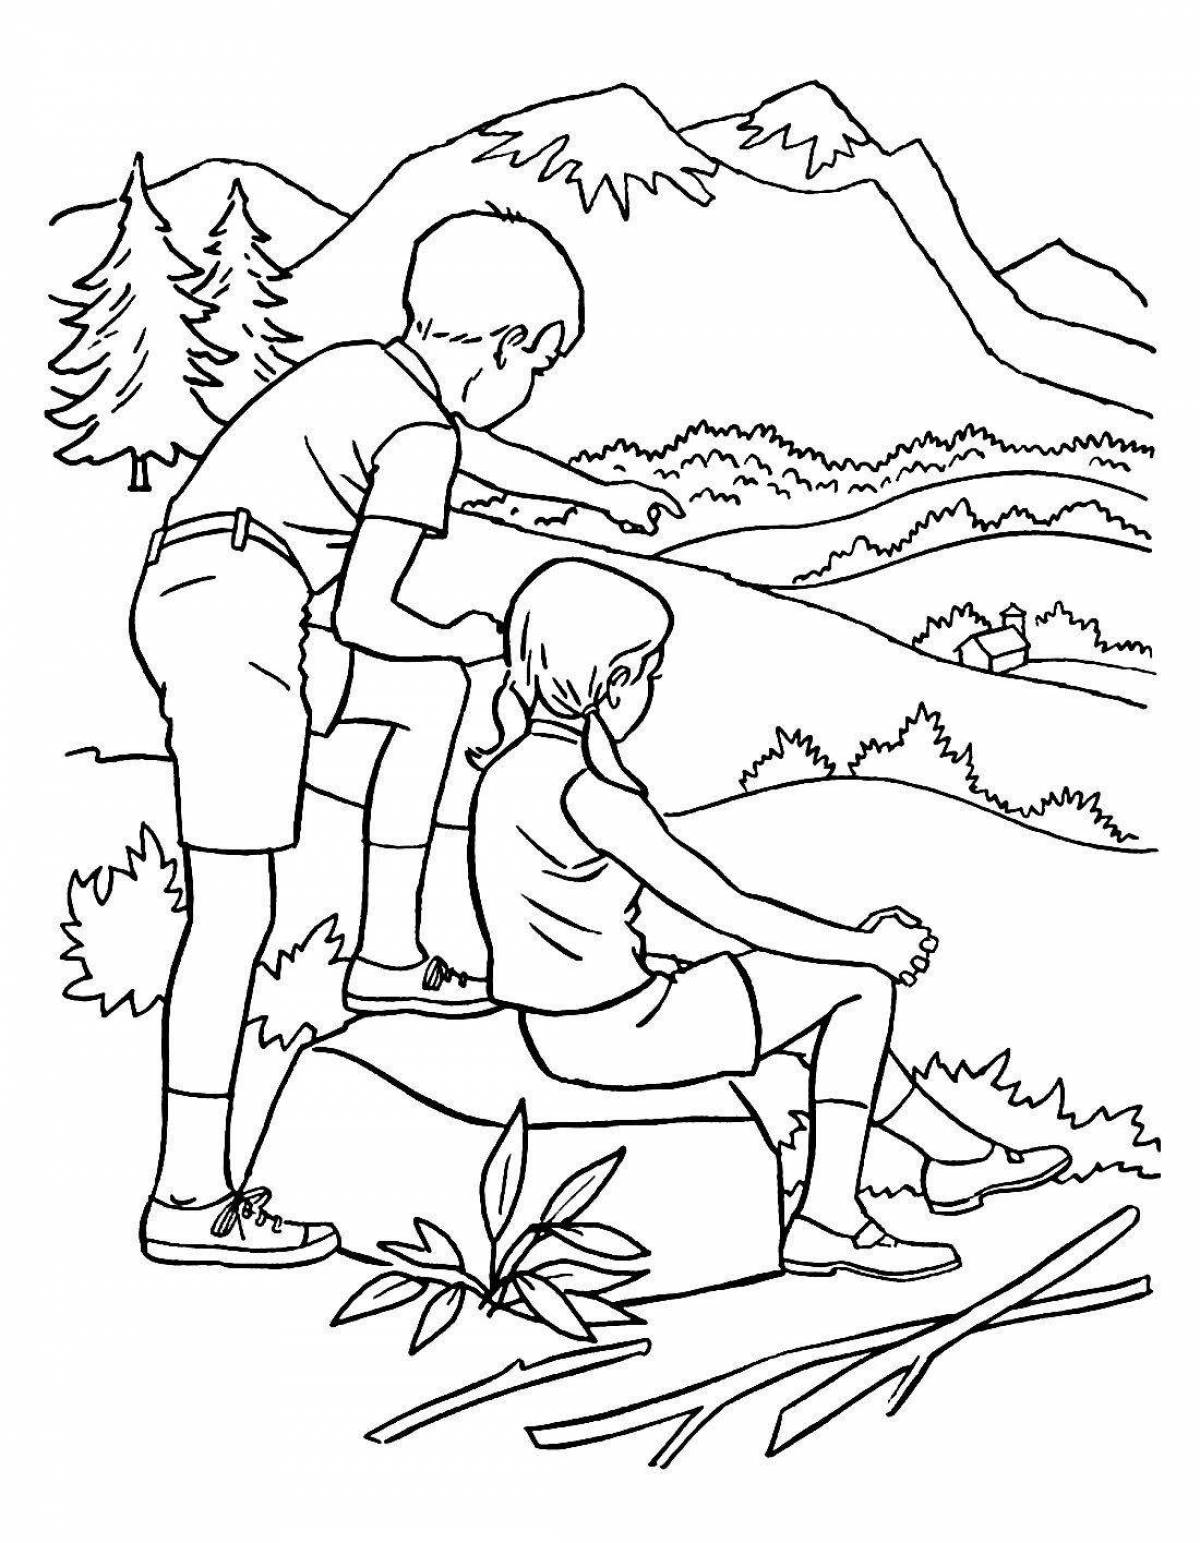 Fun coloring pages people for preschoolers